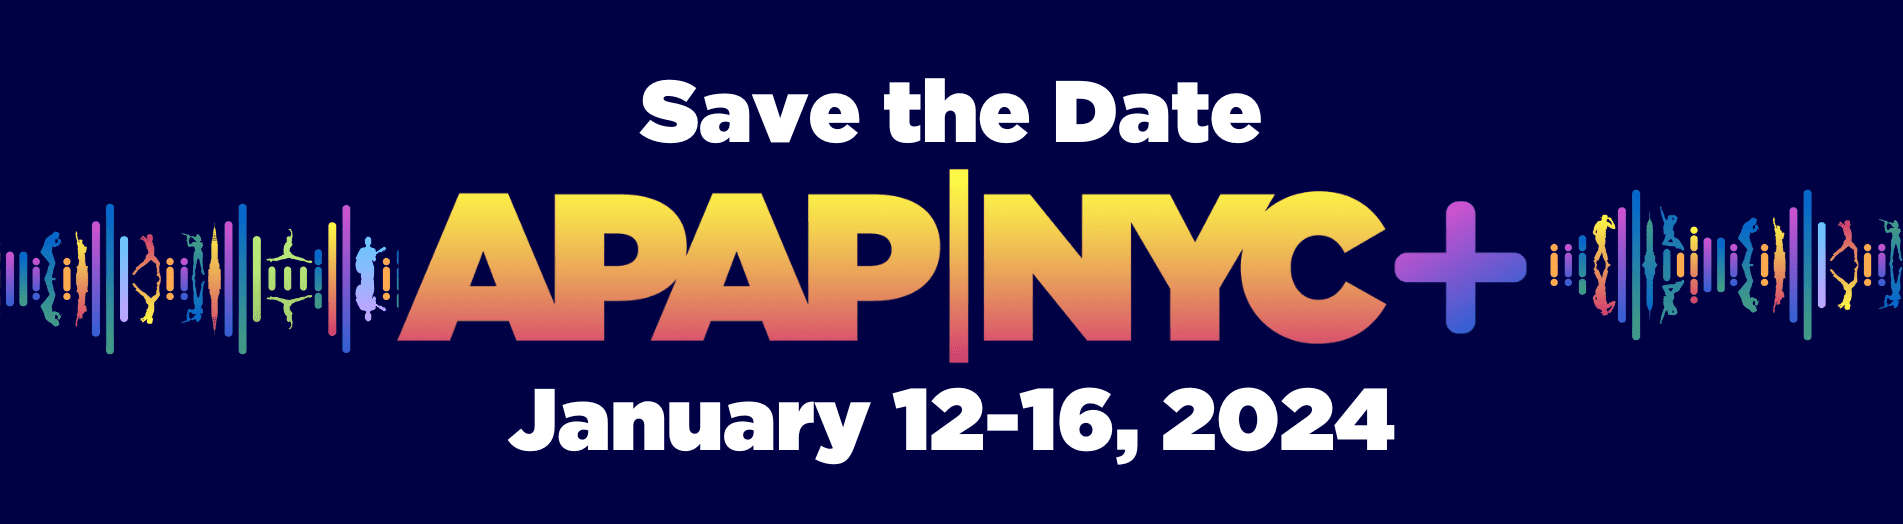 APAP|NYC+ 2023 Save the Date Logo